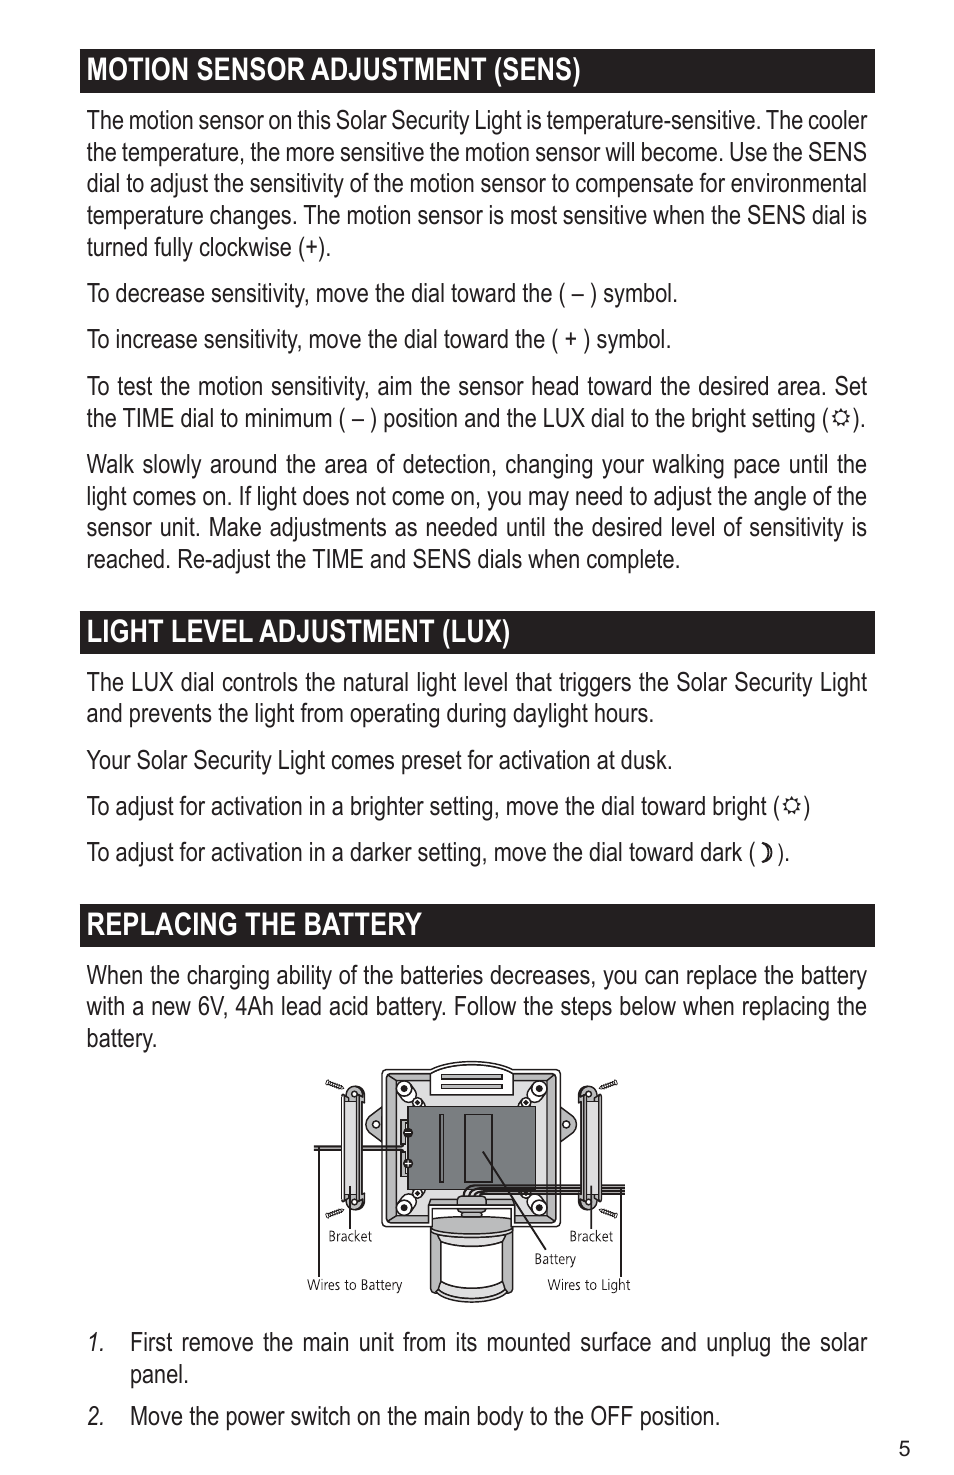 Motion sensor adjustment (sens), Light level adjustment (lux), Replacing  the battery | Maxsa Innovations Solar-Powered 50 LED Motion-Activated  Outdoor Security Floodlight User Manual | Page 5 / 8